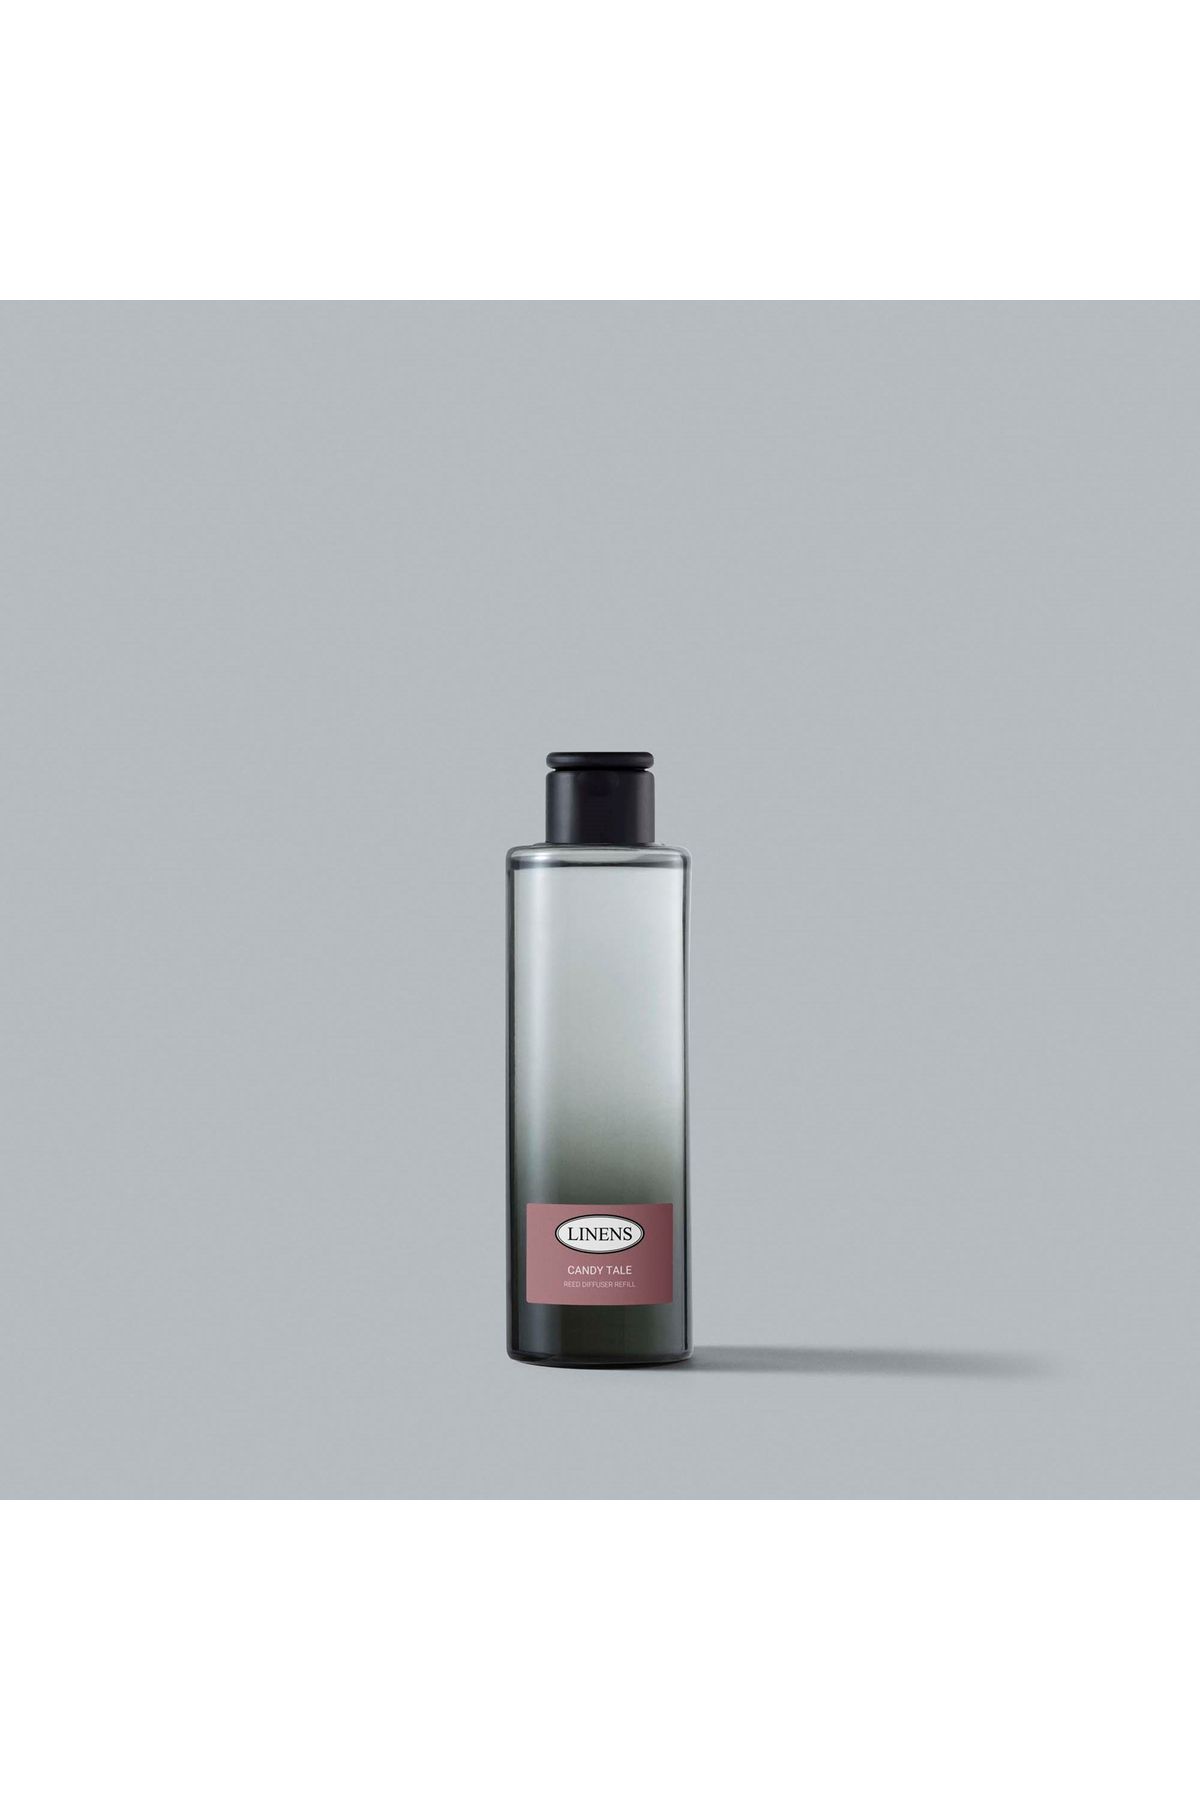 Linens Candy Tale 200 ml Refill